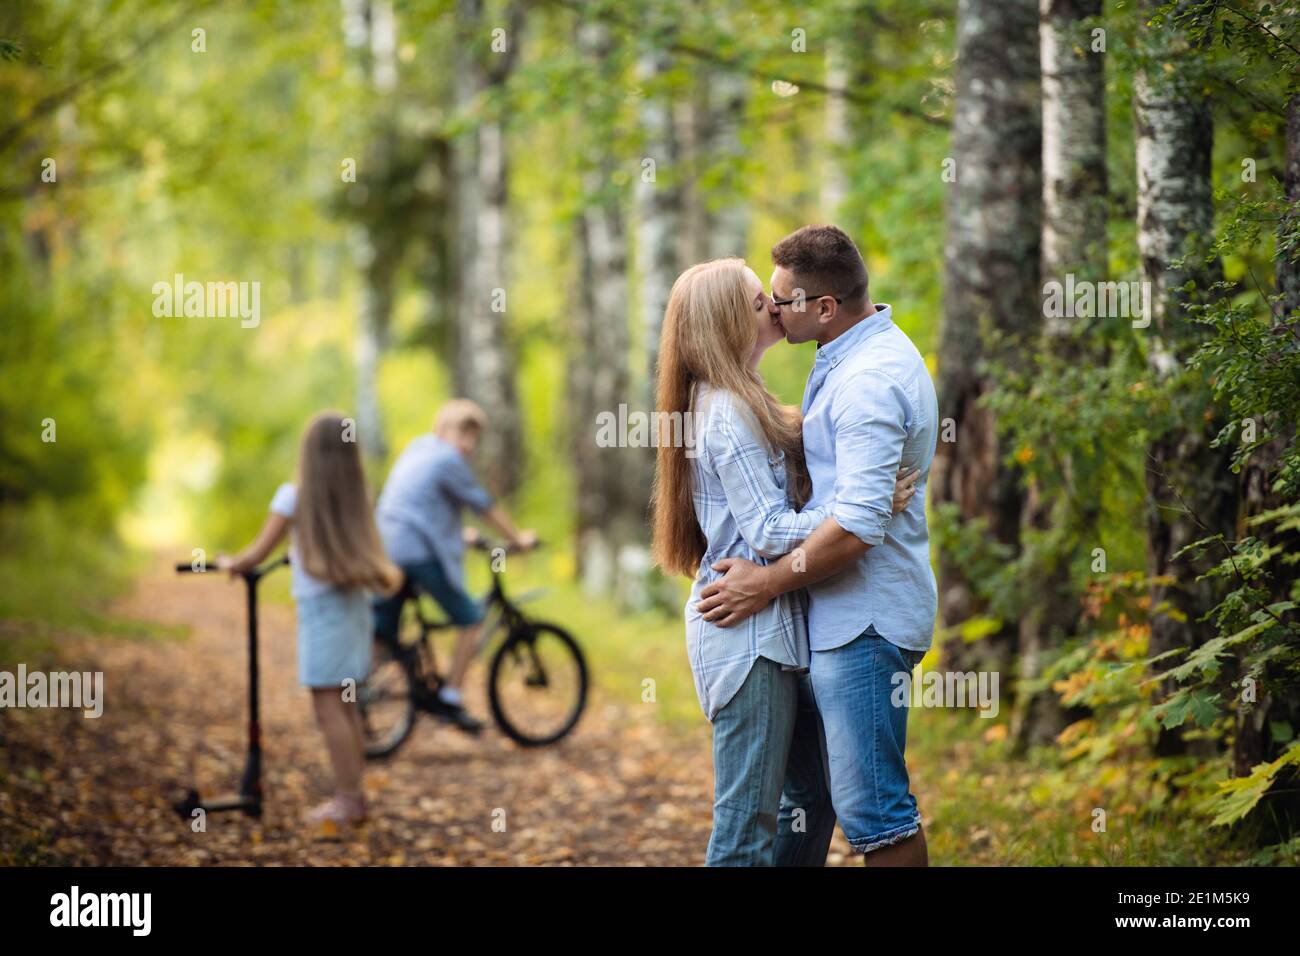 Rear view of family walking along autumn path in a park or forest Stock Photo